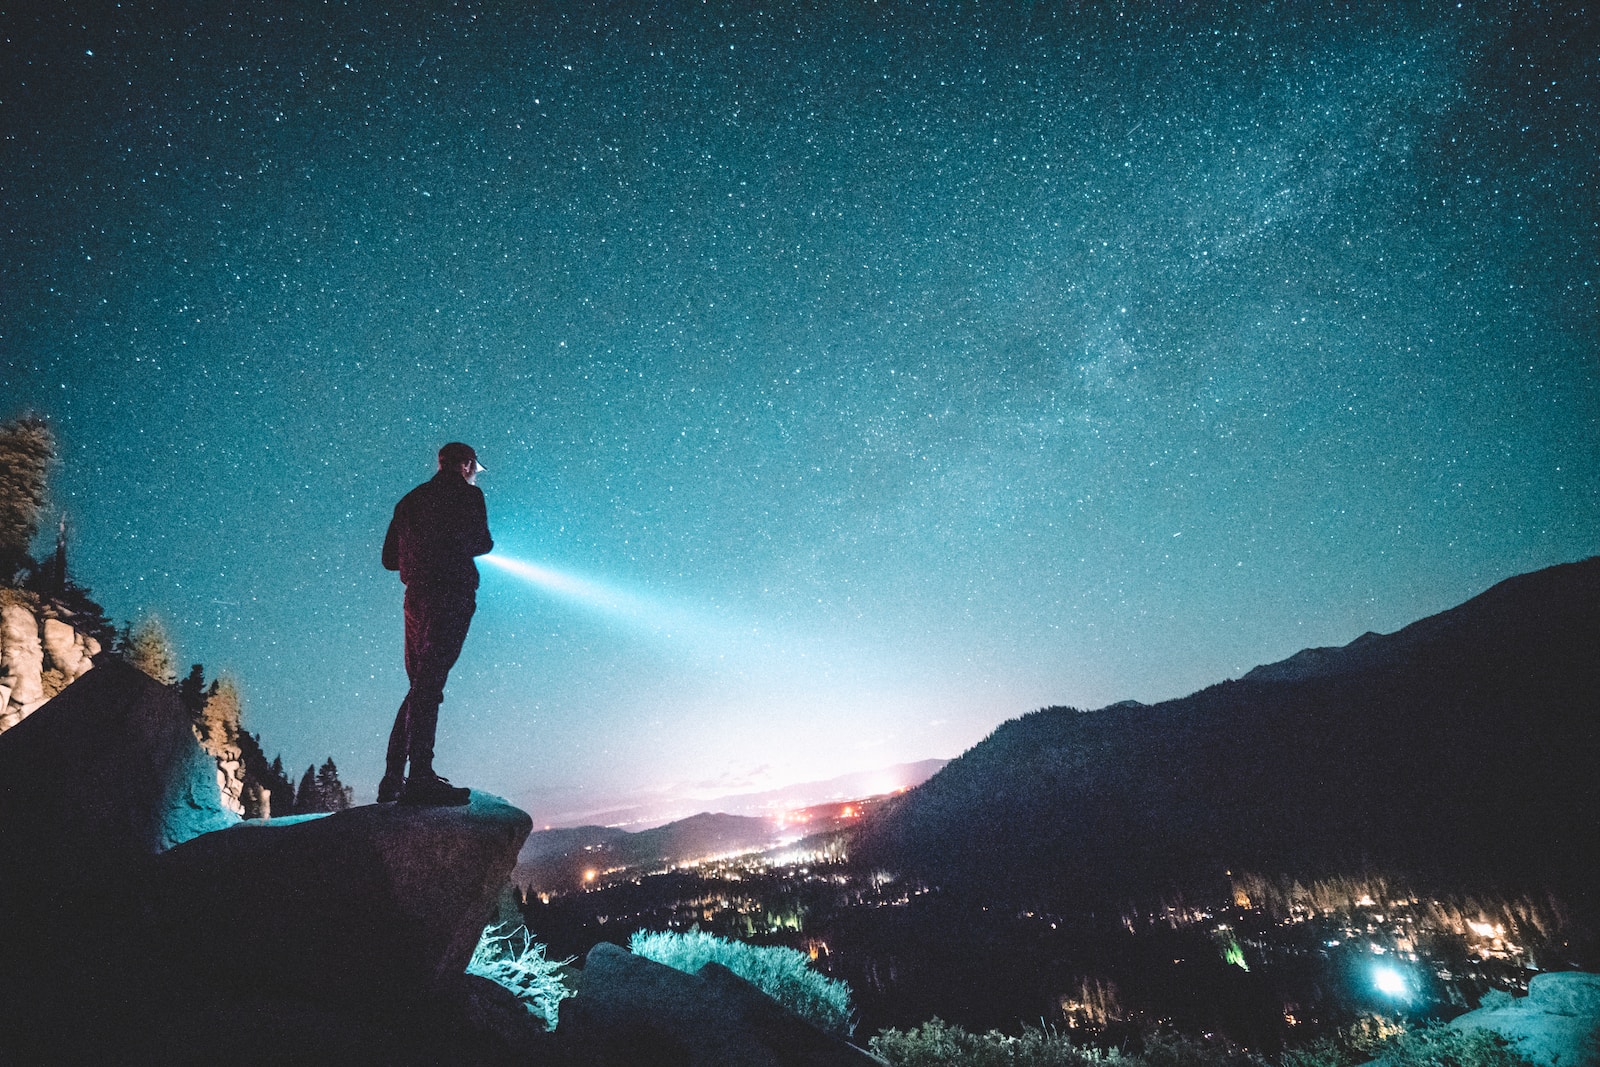 Can You Go Hiking At Night? How To Night Hike